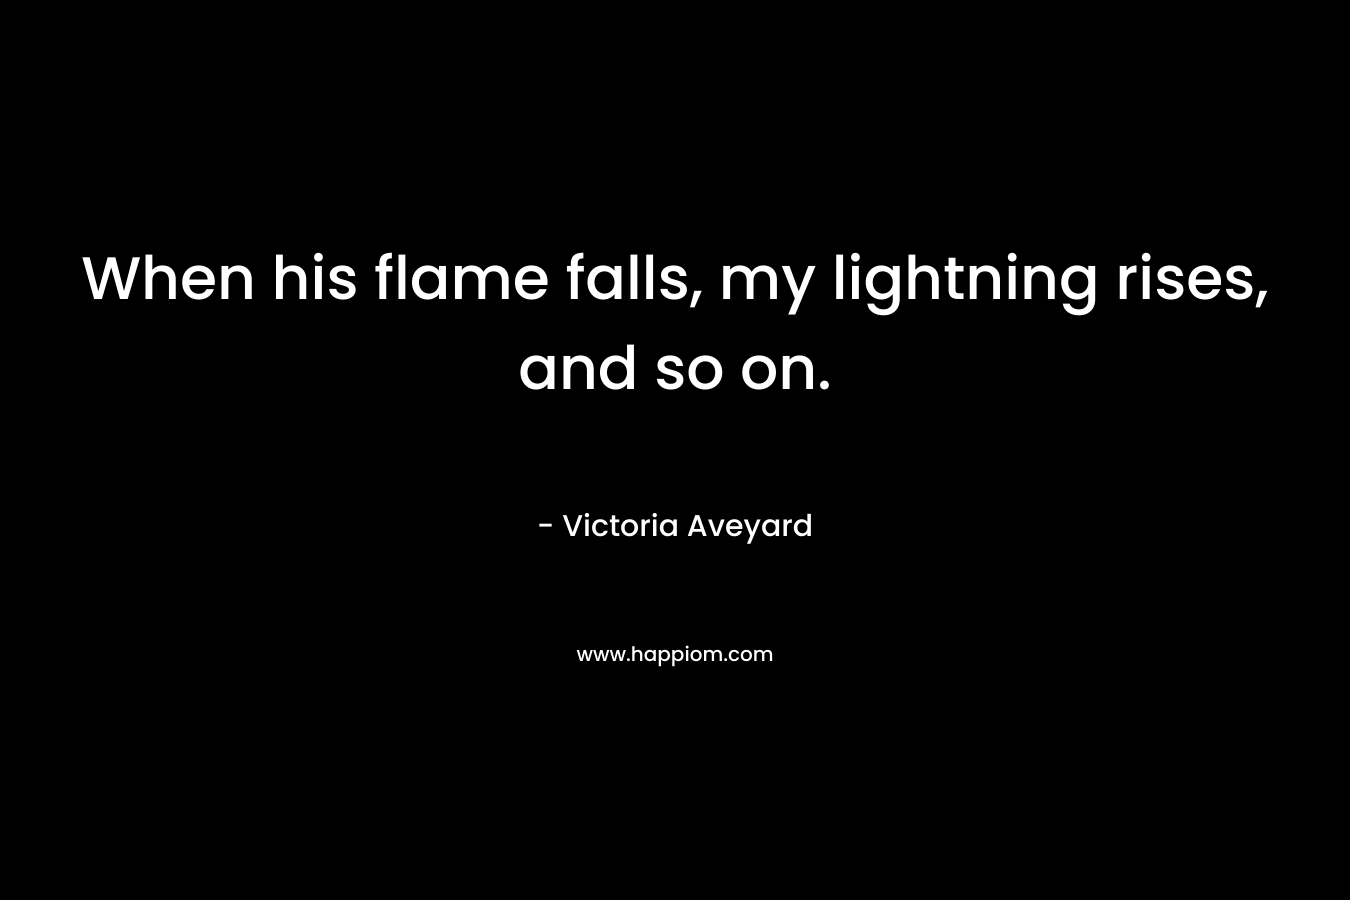 When his flame falls, my lightning rises, and so on.